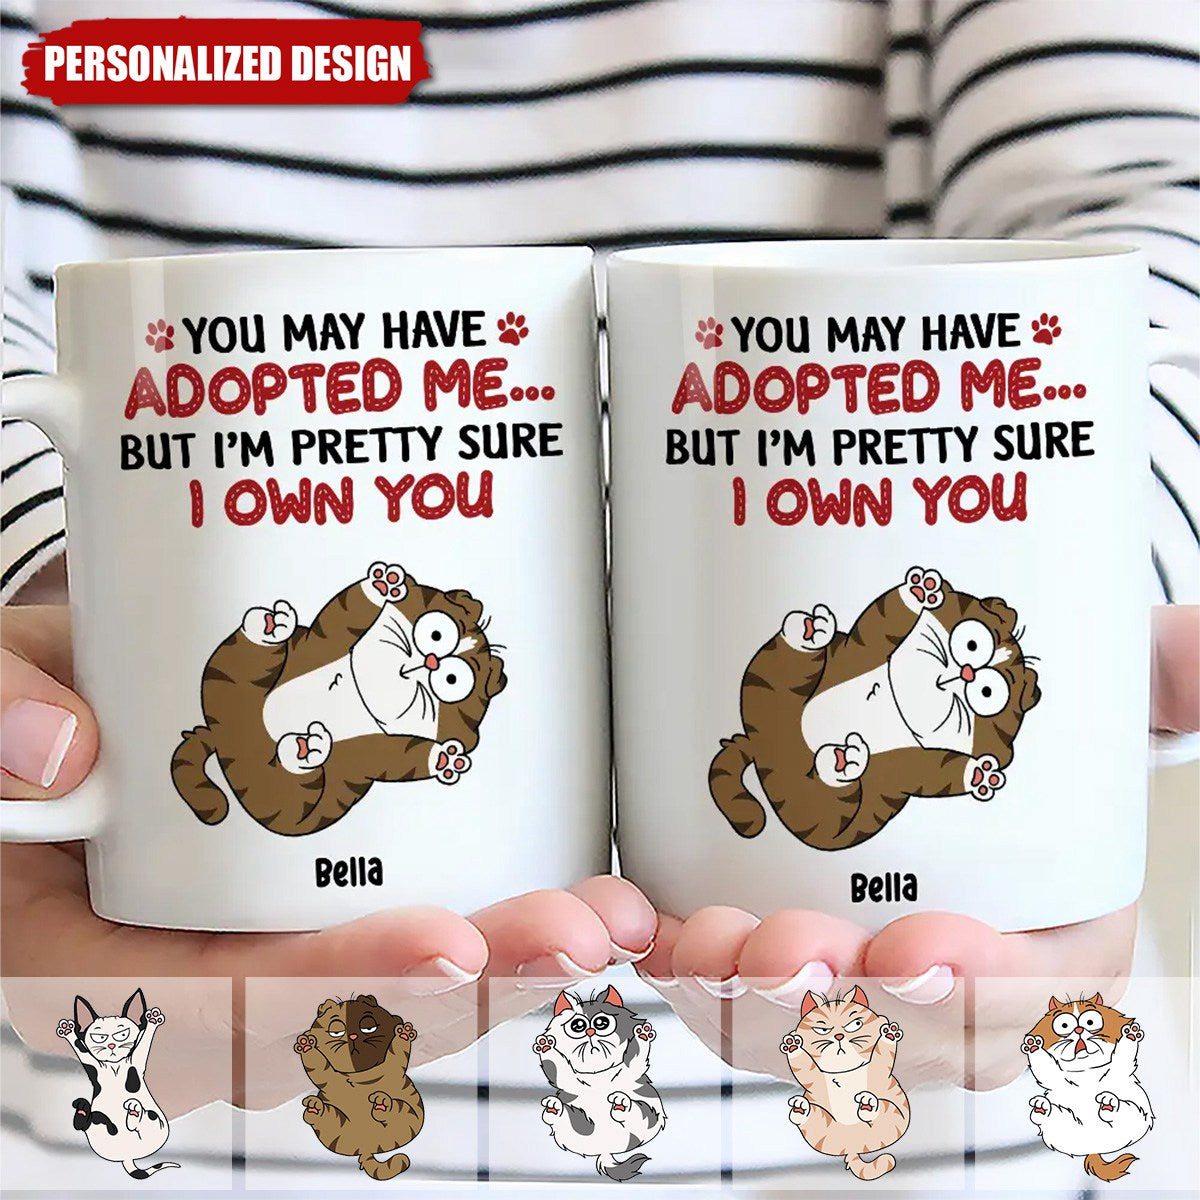 We're Pretty Sure We Own You - Personalized Mug